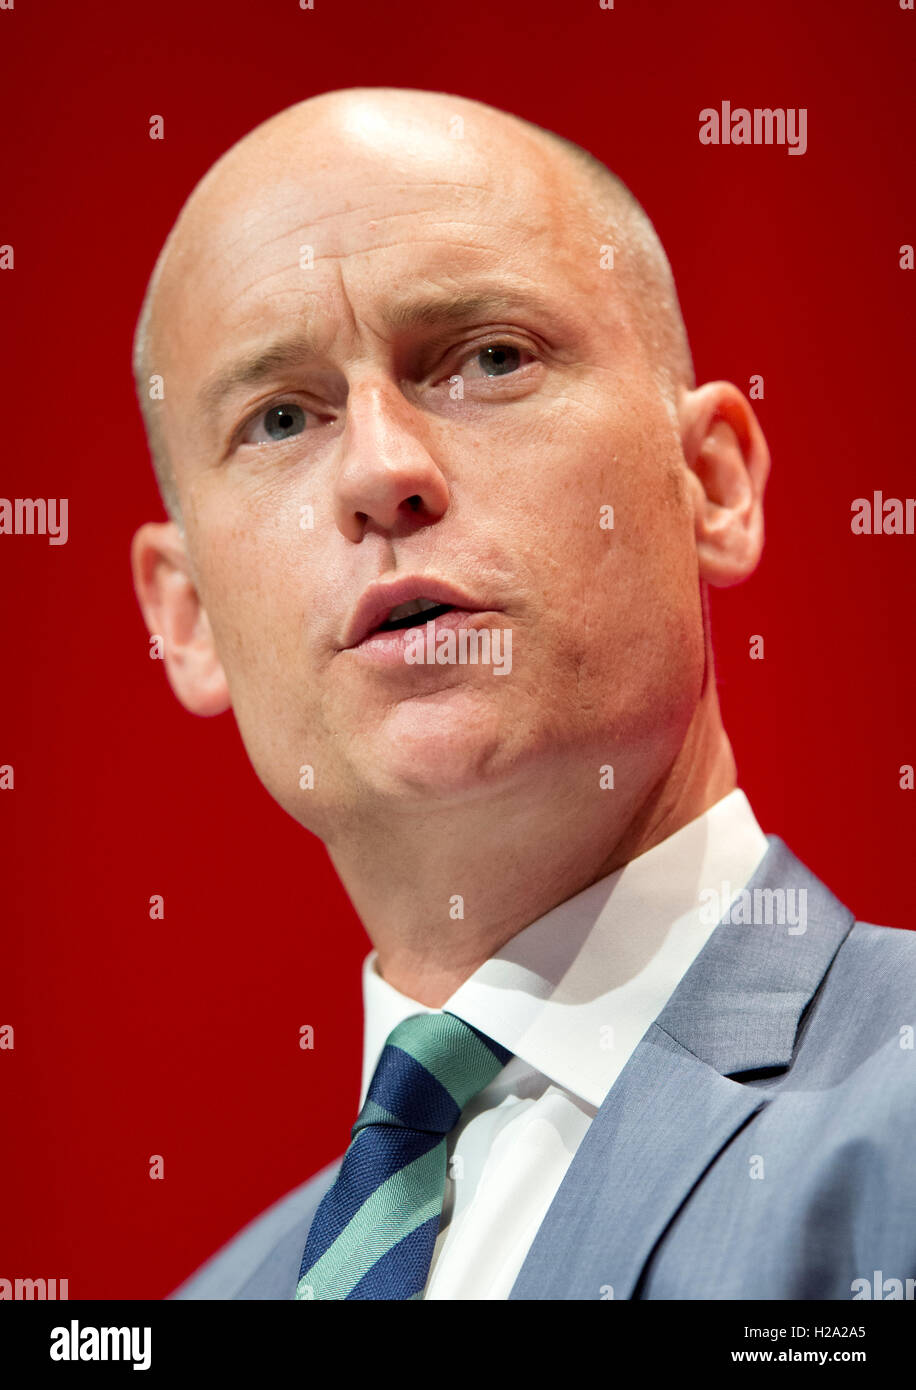 Liverpool, UK. 26th September 2016. Stephen Kinnock MP speaks at day two of the Labour Party Conference in Liverpool. Credit:  Russell Hart/Alamy Live News. Stock Photo